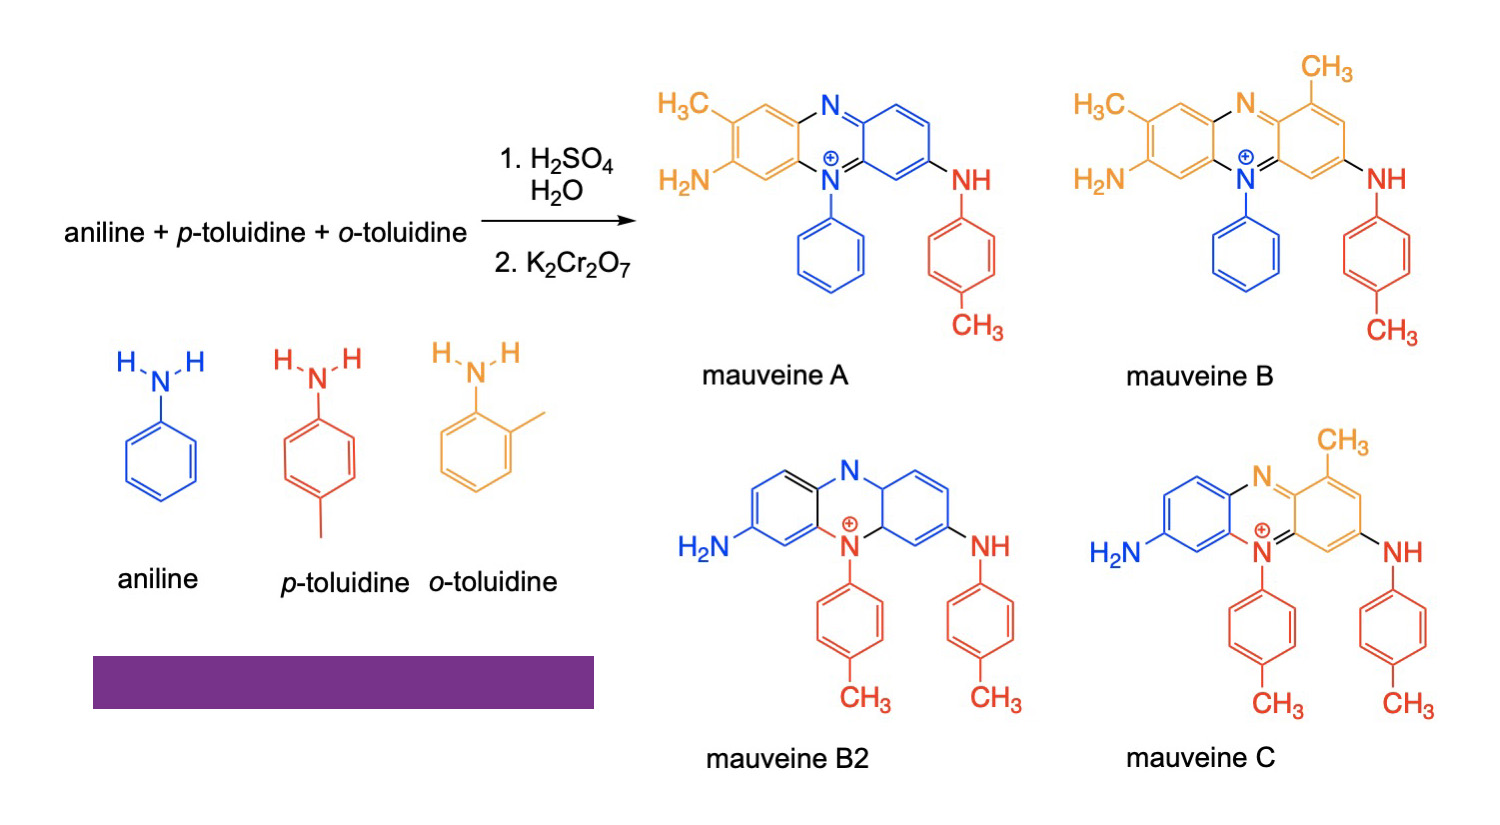 The synthesis of the components of mauveine